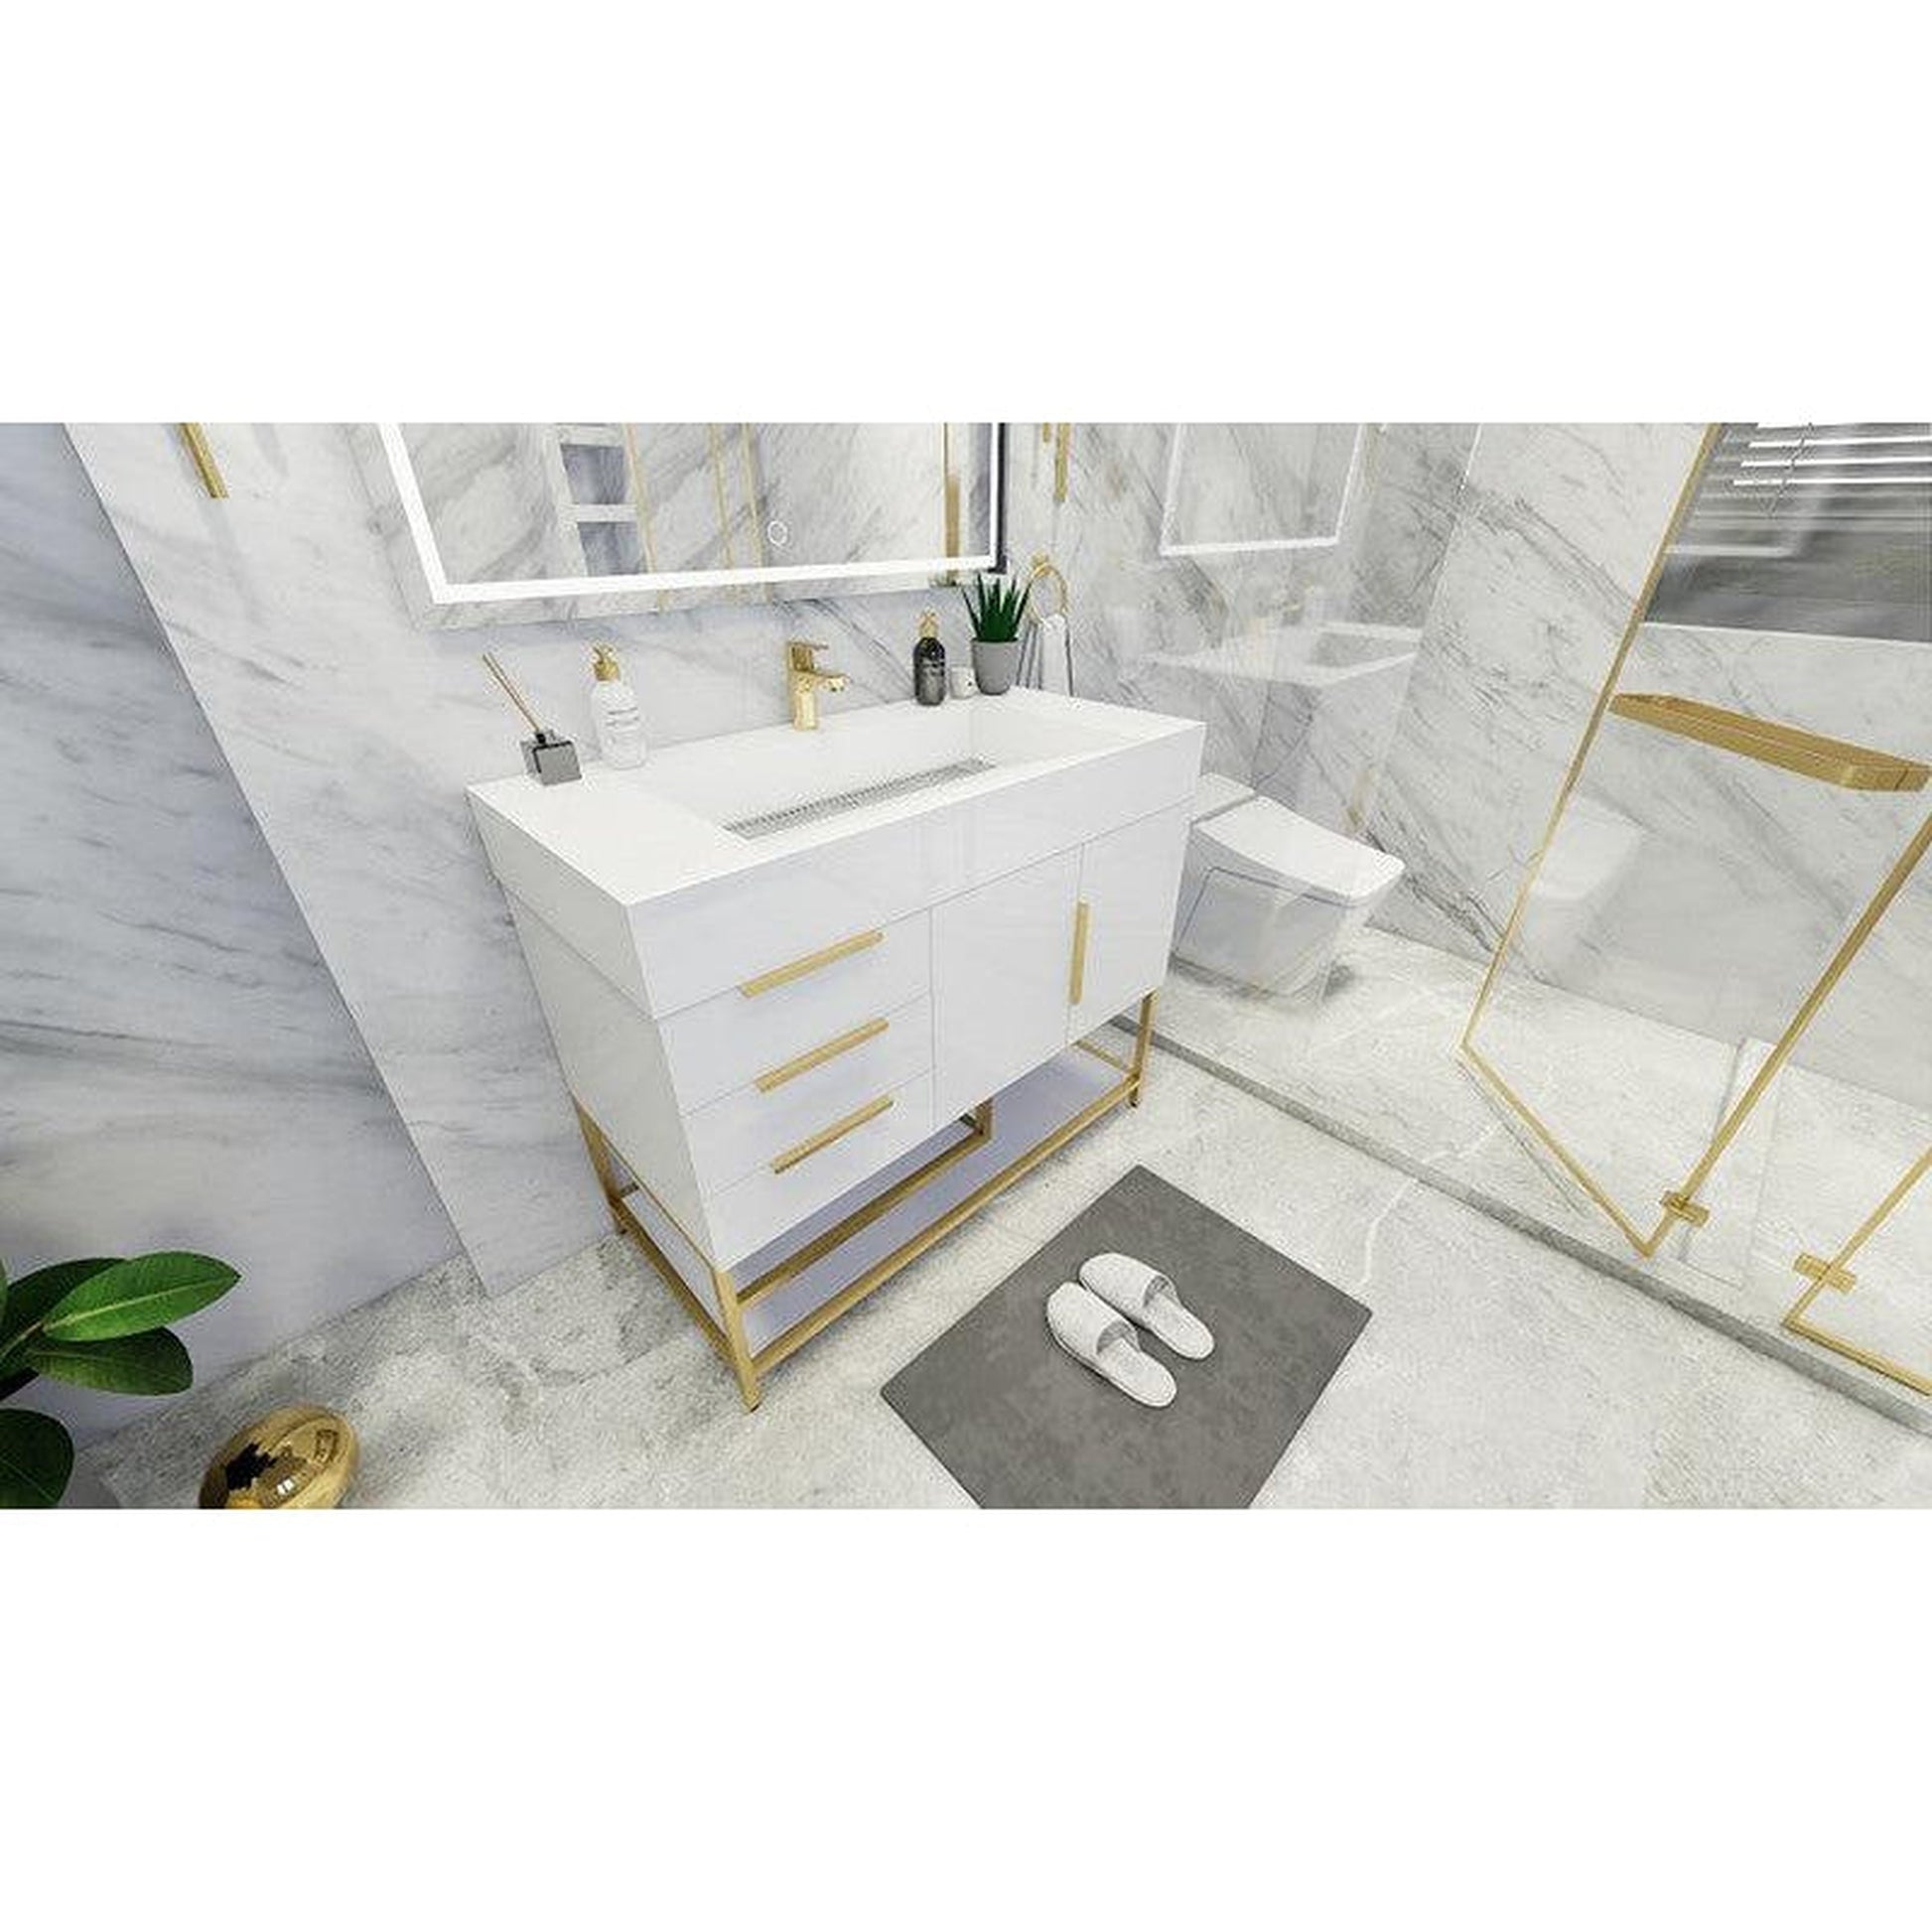 Moreno Bath Bethany 42" High Gloss White Freestanding Vanity With Left Side Drawers and Single Reinforced White Acrylic Sink